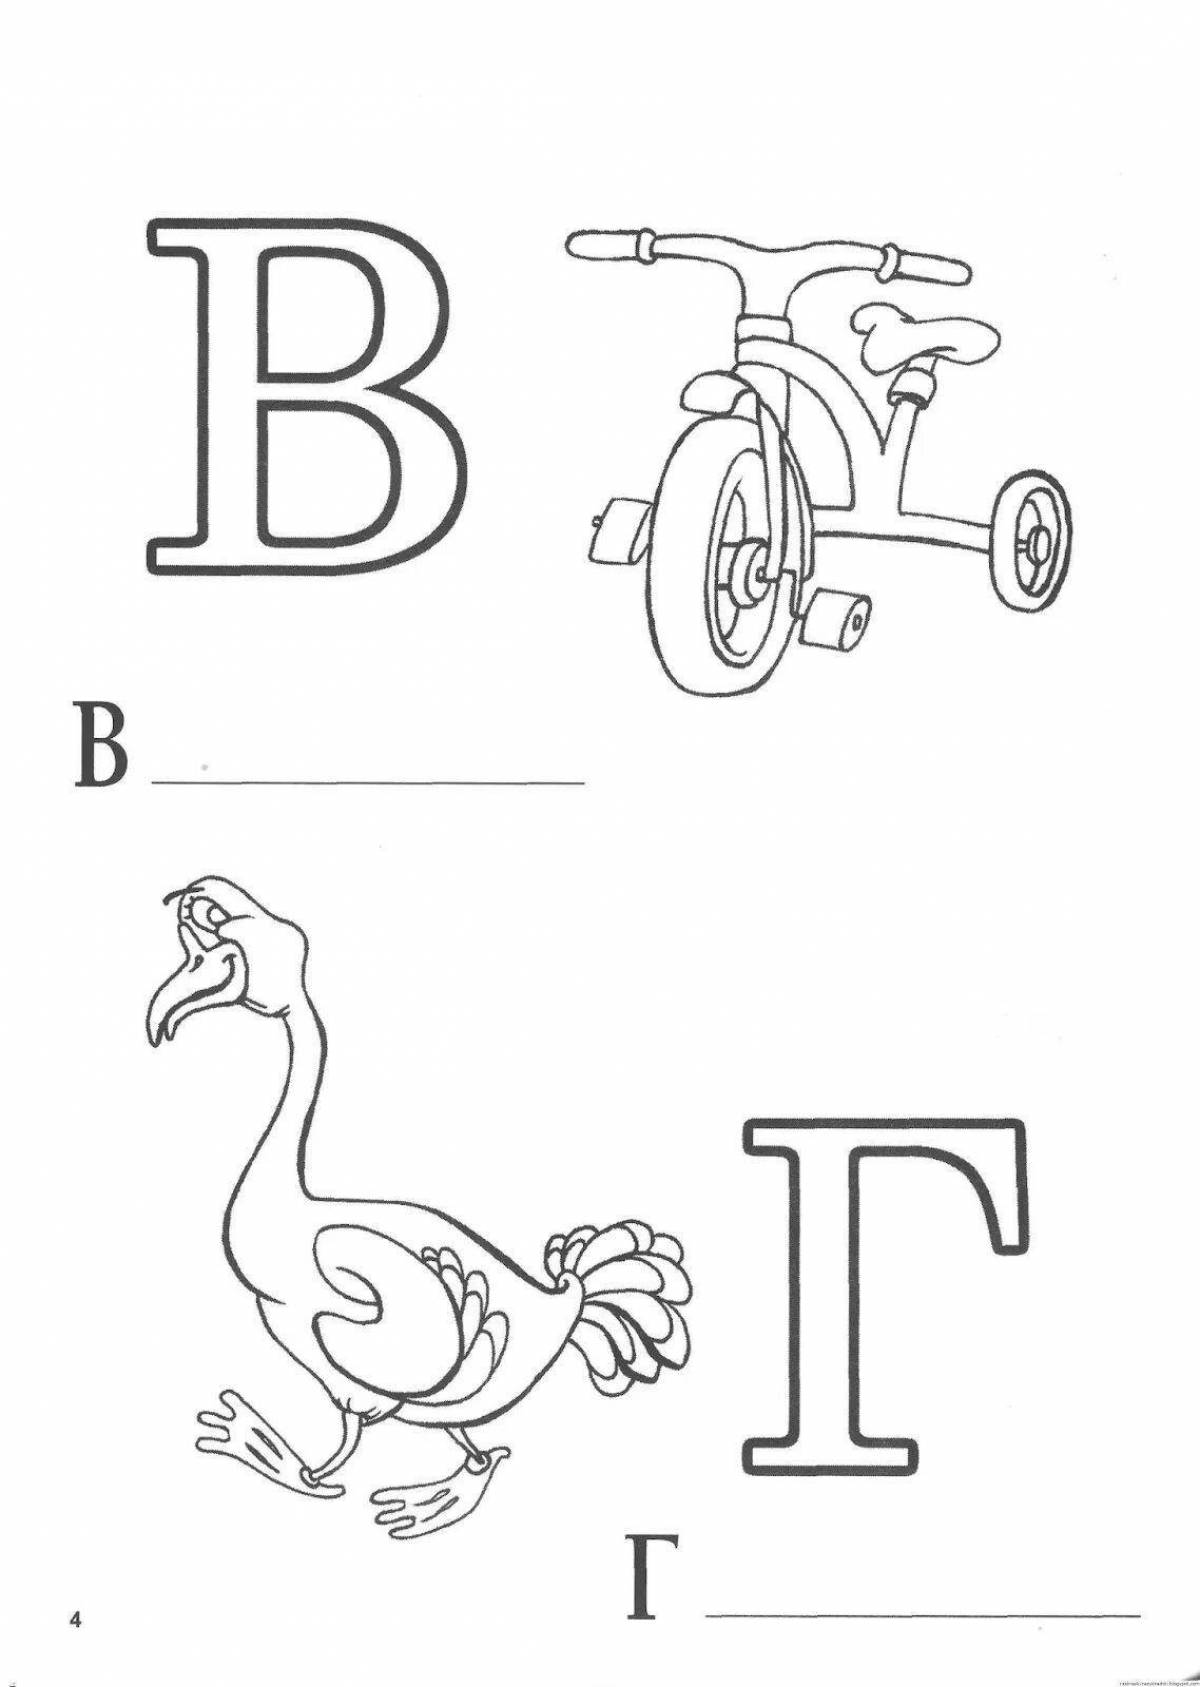 Coloring book with alphabet for children 5-6 years old